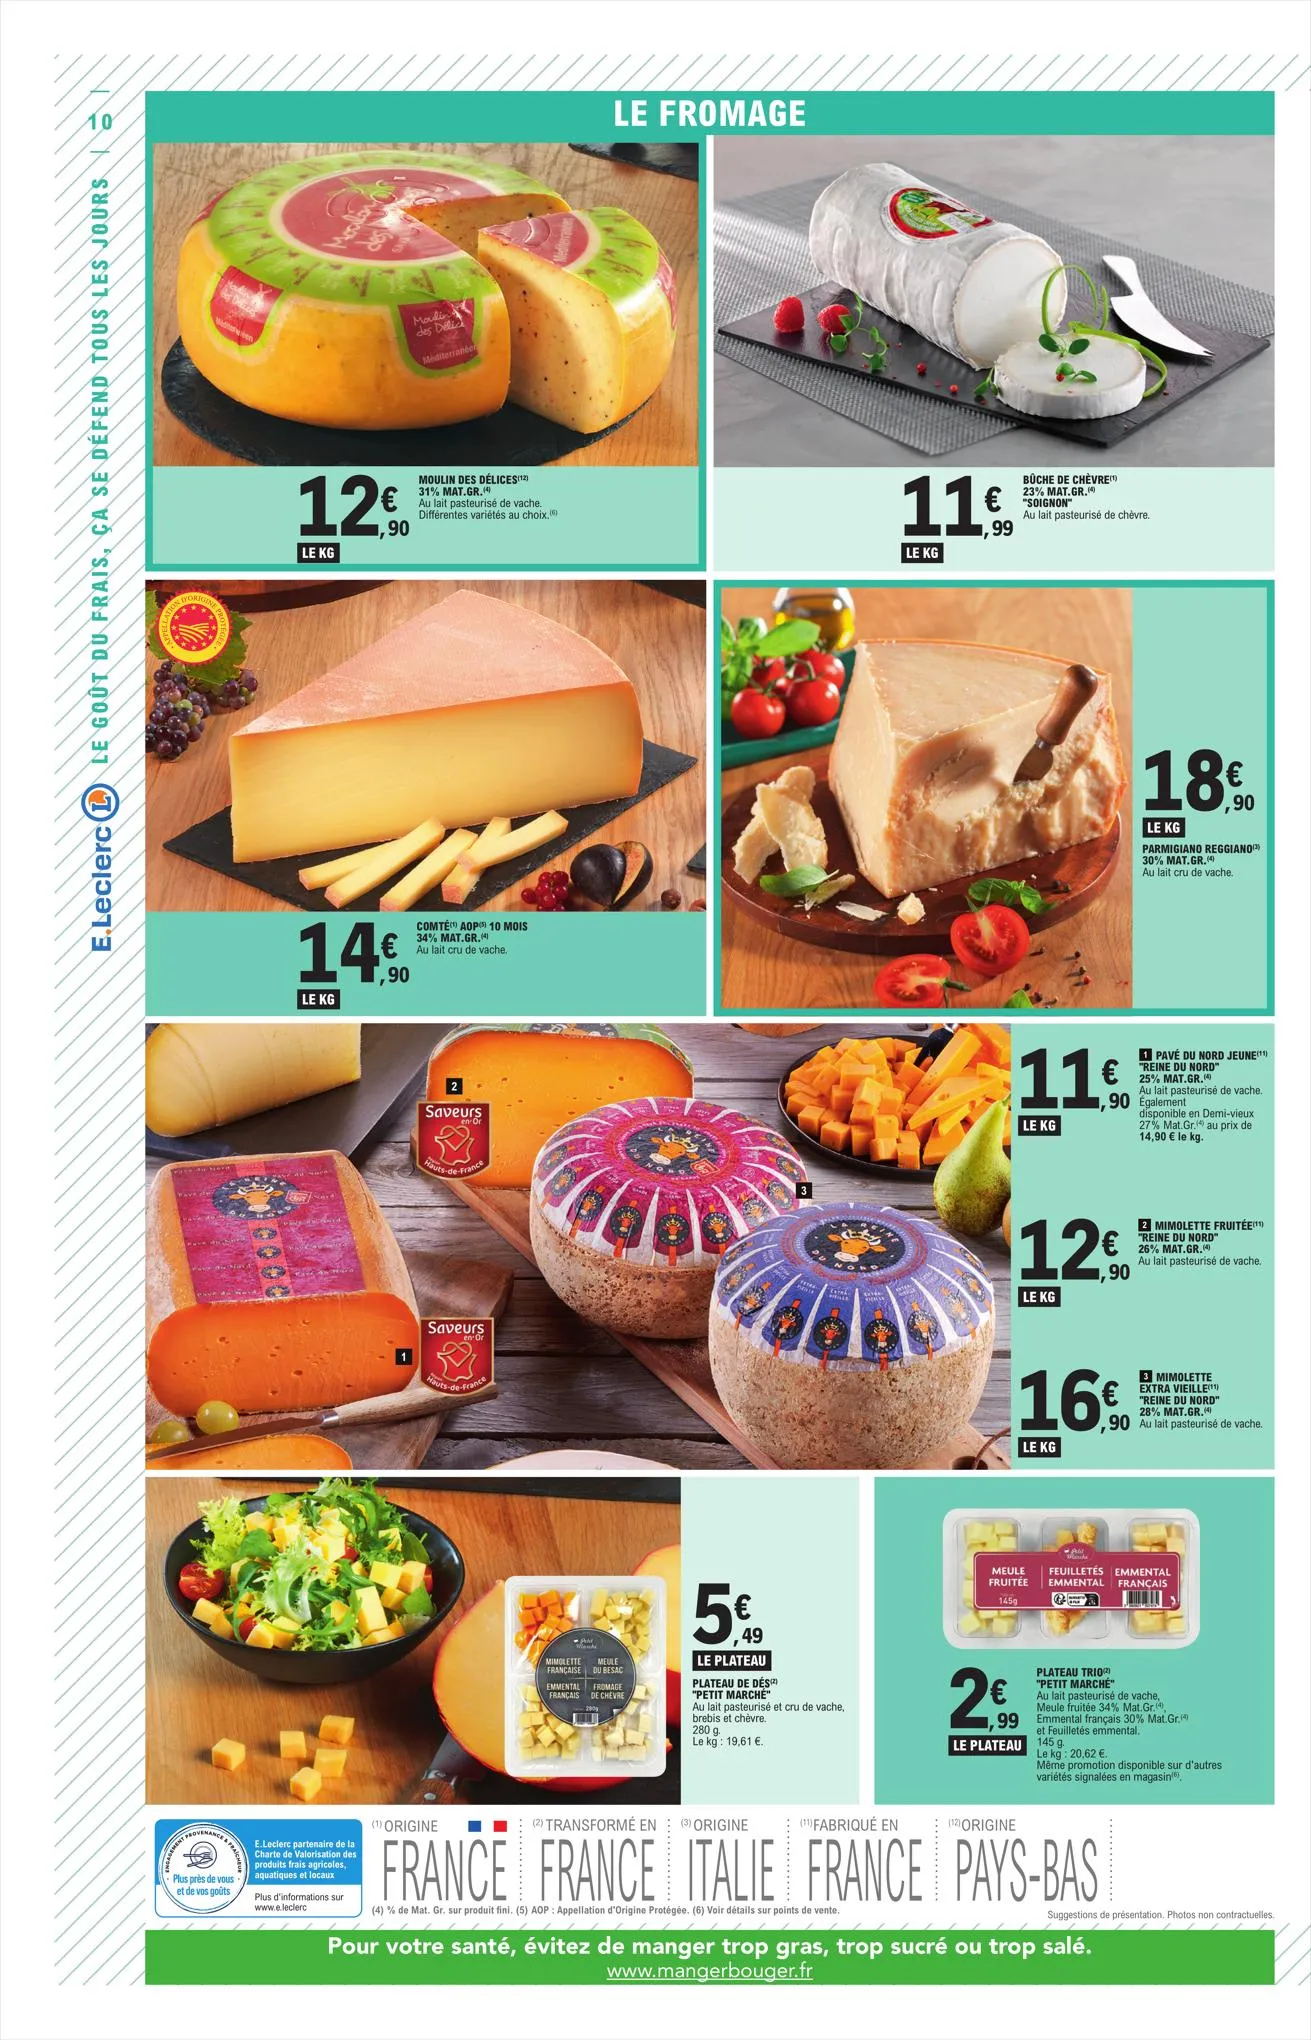 Catalogue Relance Alimentaire 10 - Mixte, page 00010